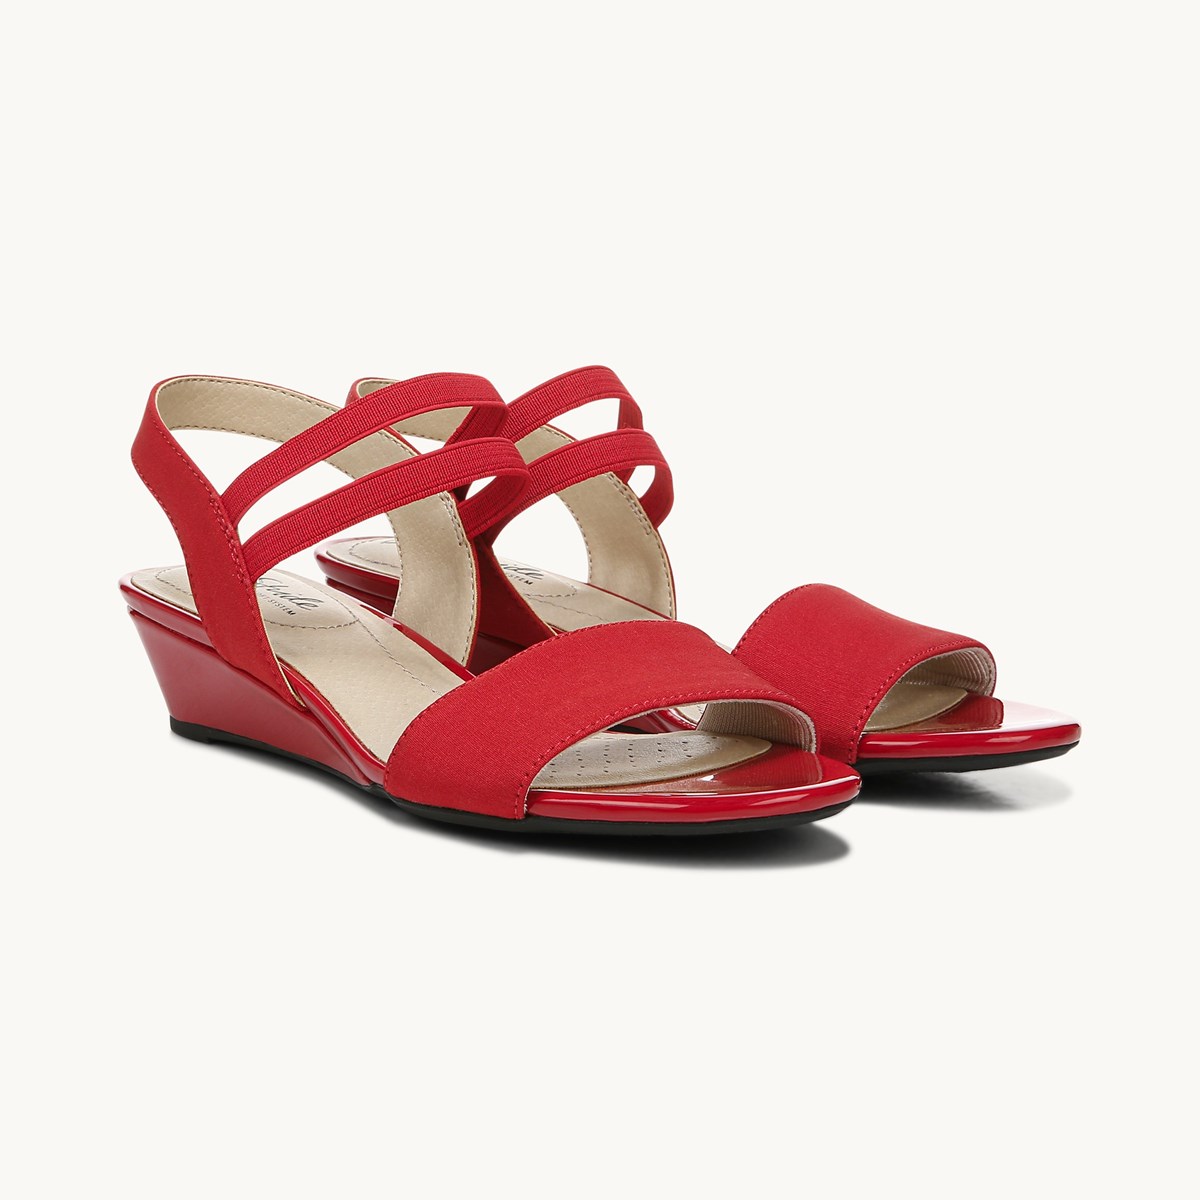 LifeStride Yolo Sandal in Red Fabric 